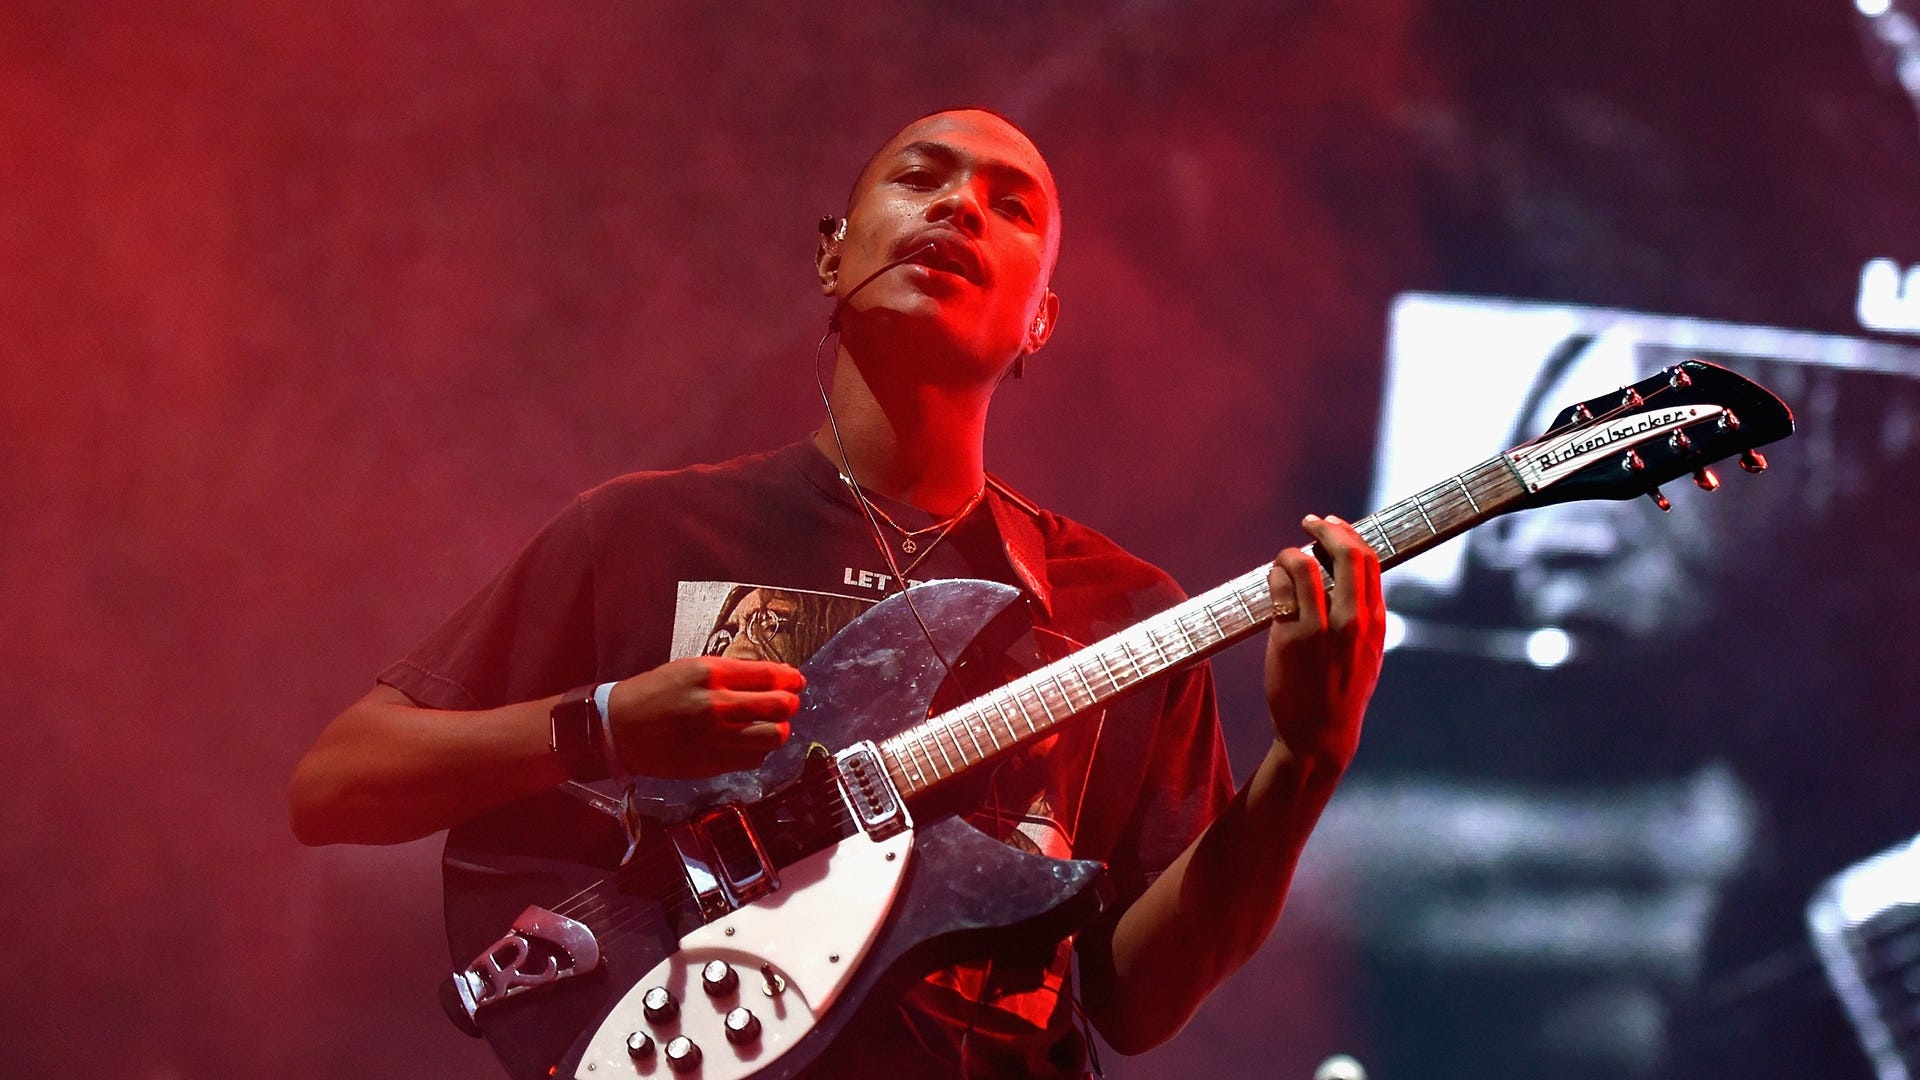 Steve Lacy, Introduction songs, Music recommendations, Creative stylings, 1920x1080 Full HD Desktop